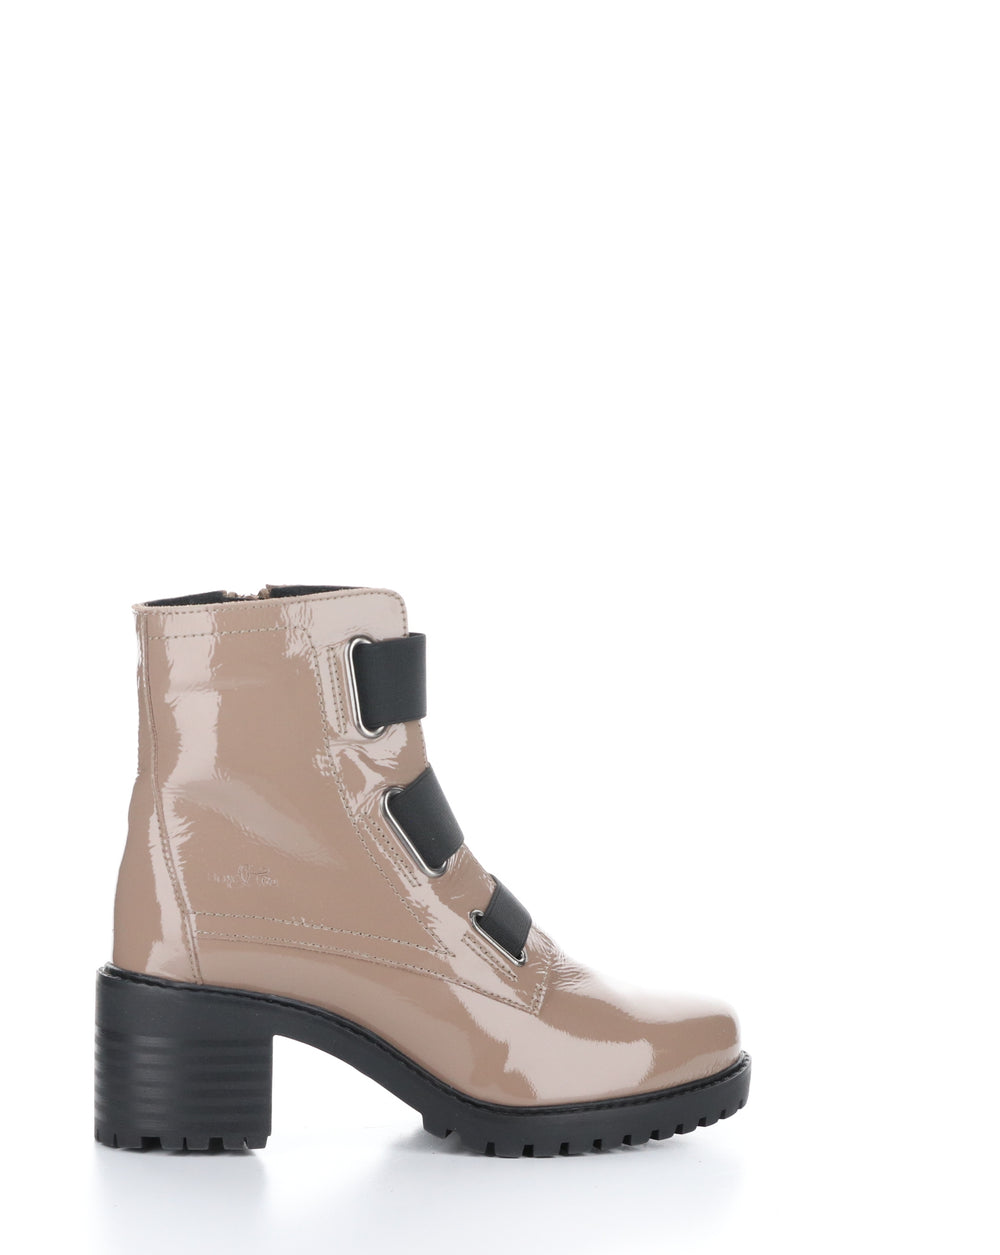 INDIE CAPPUCCINO Elasticated Boots